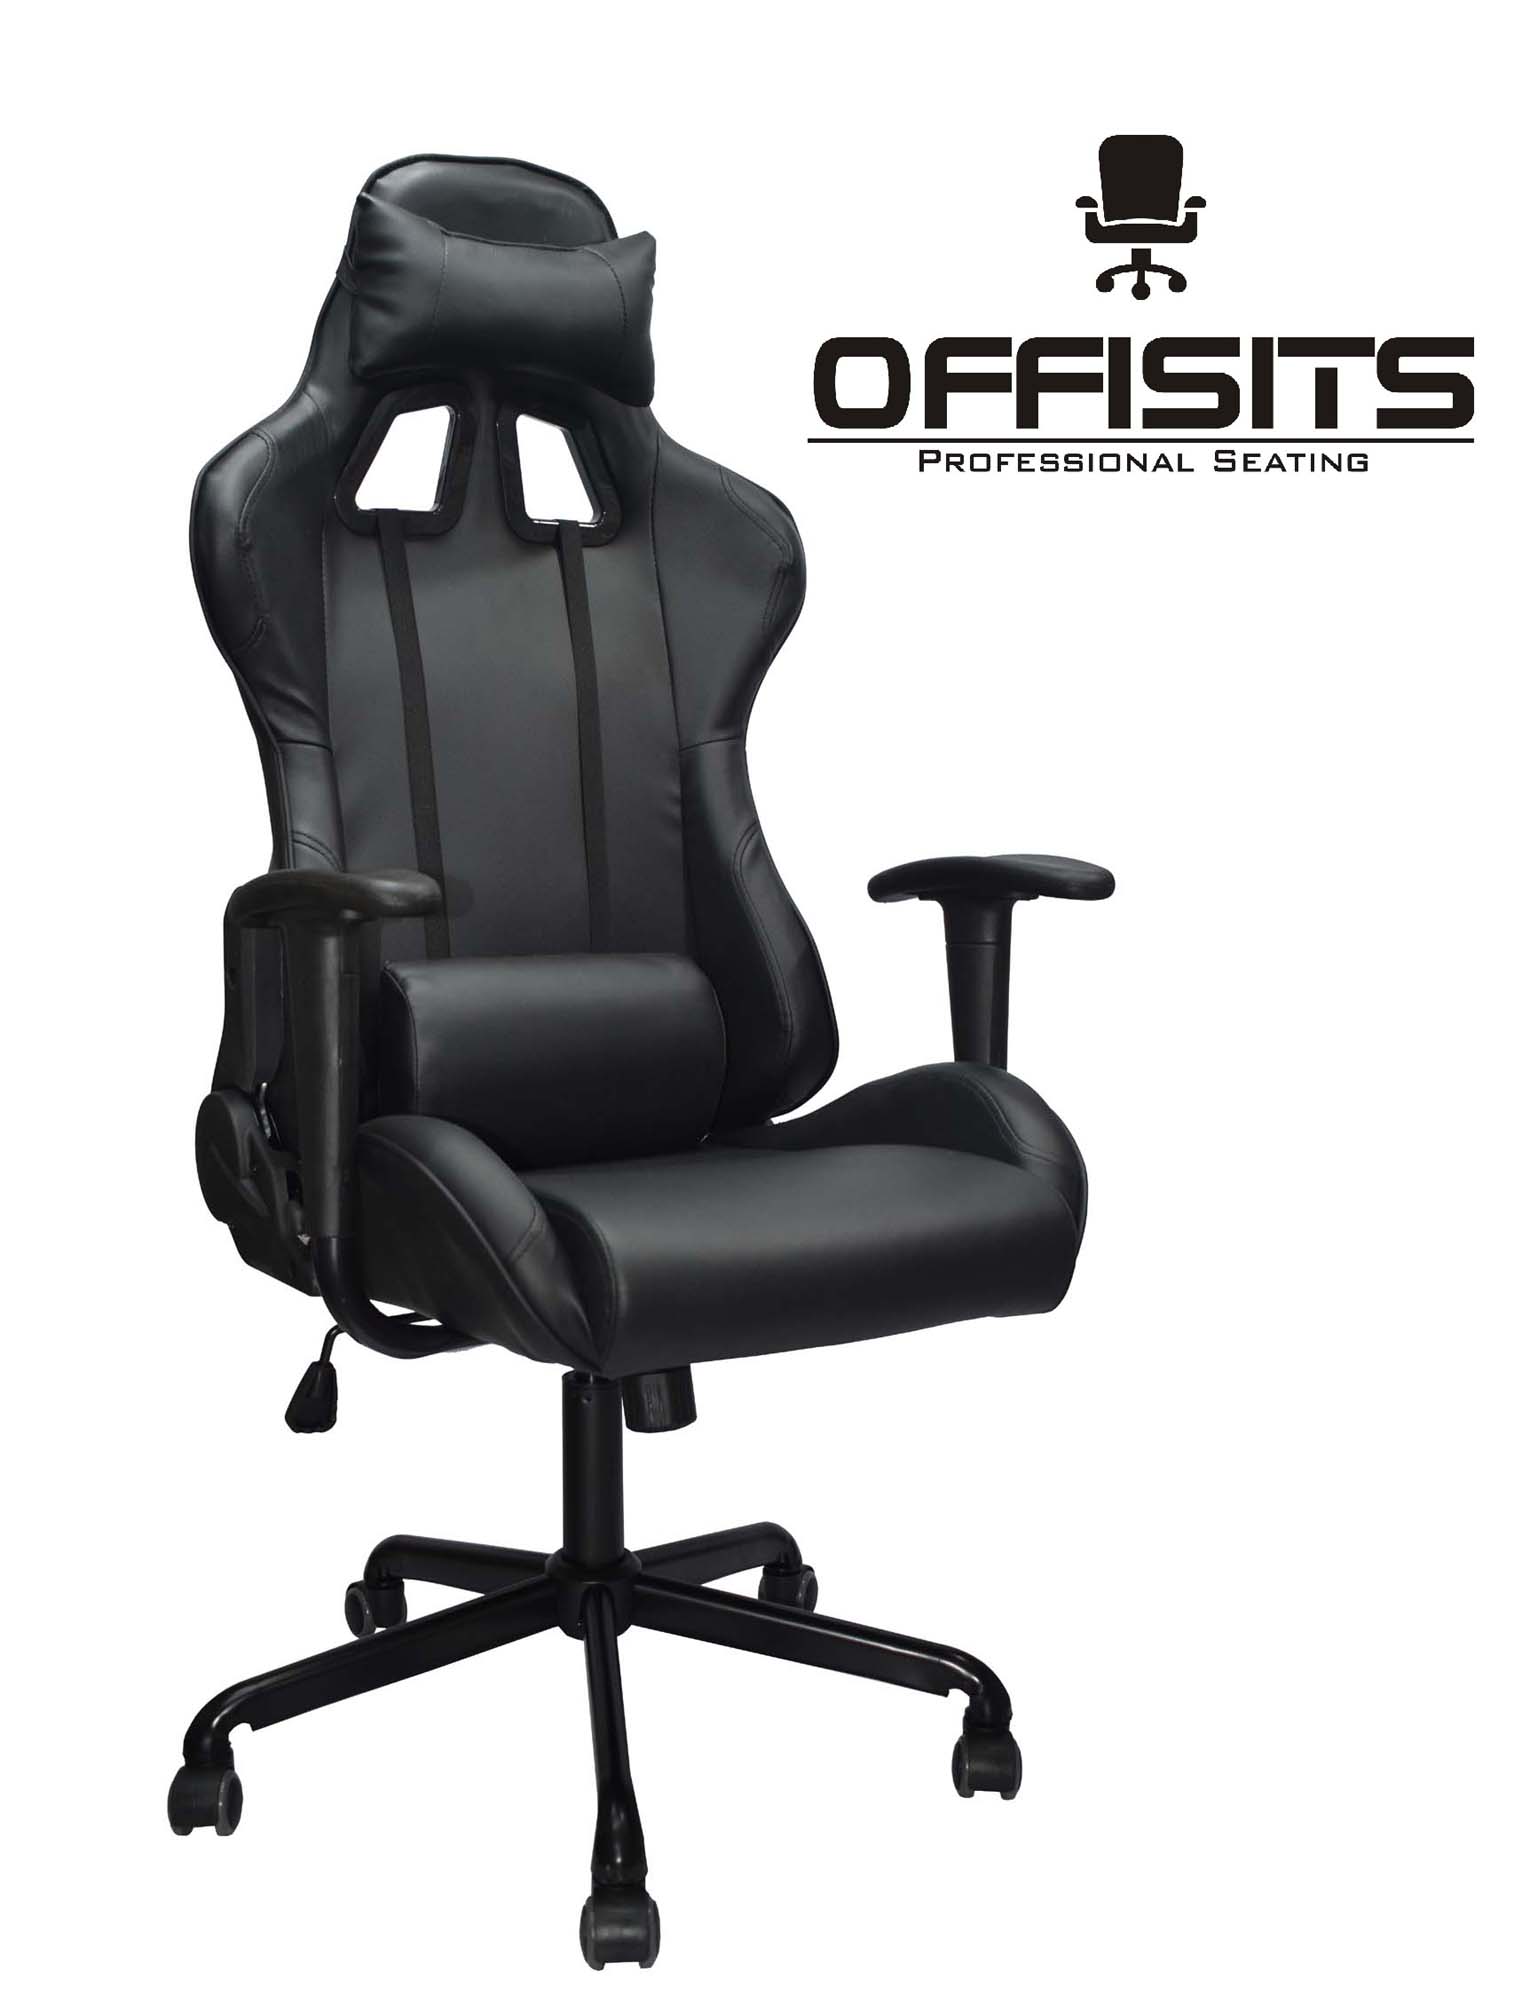 ergonomic Best Value Gaming Chairs with Dual Monitor